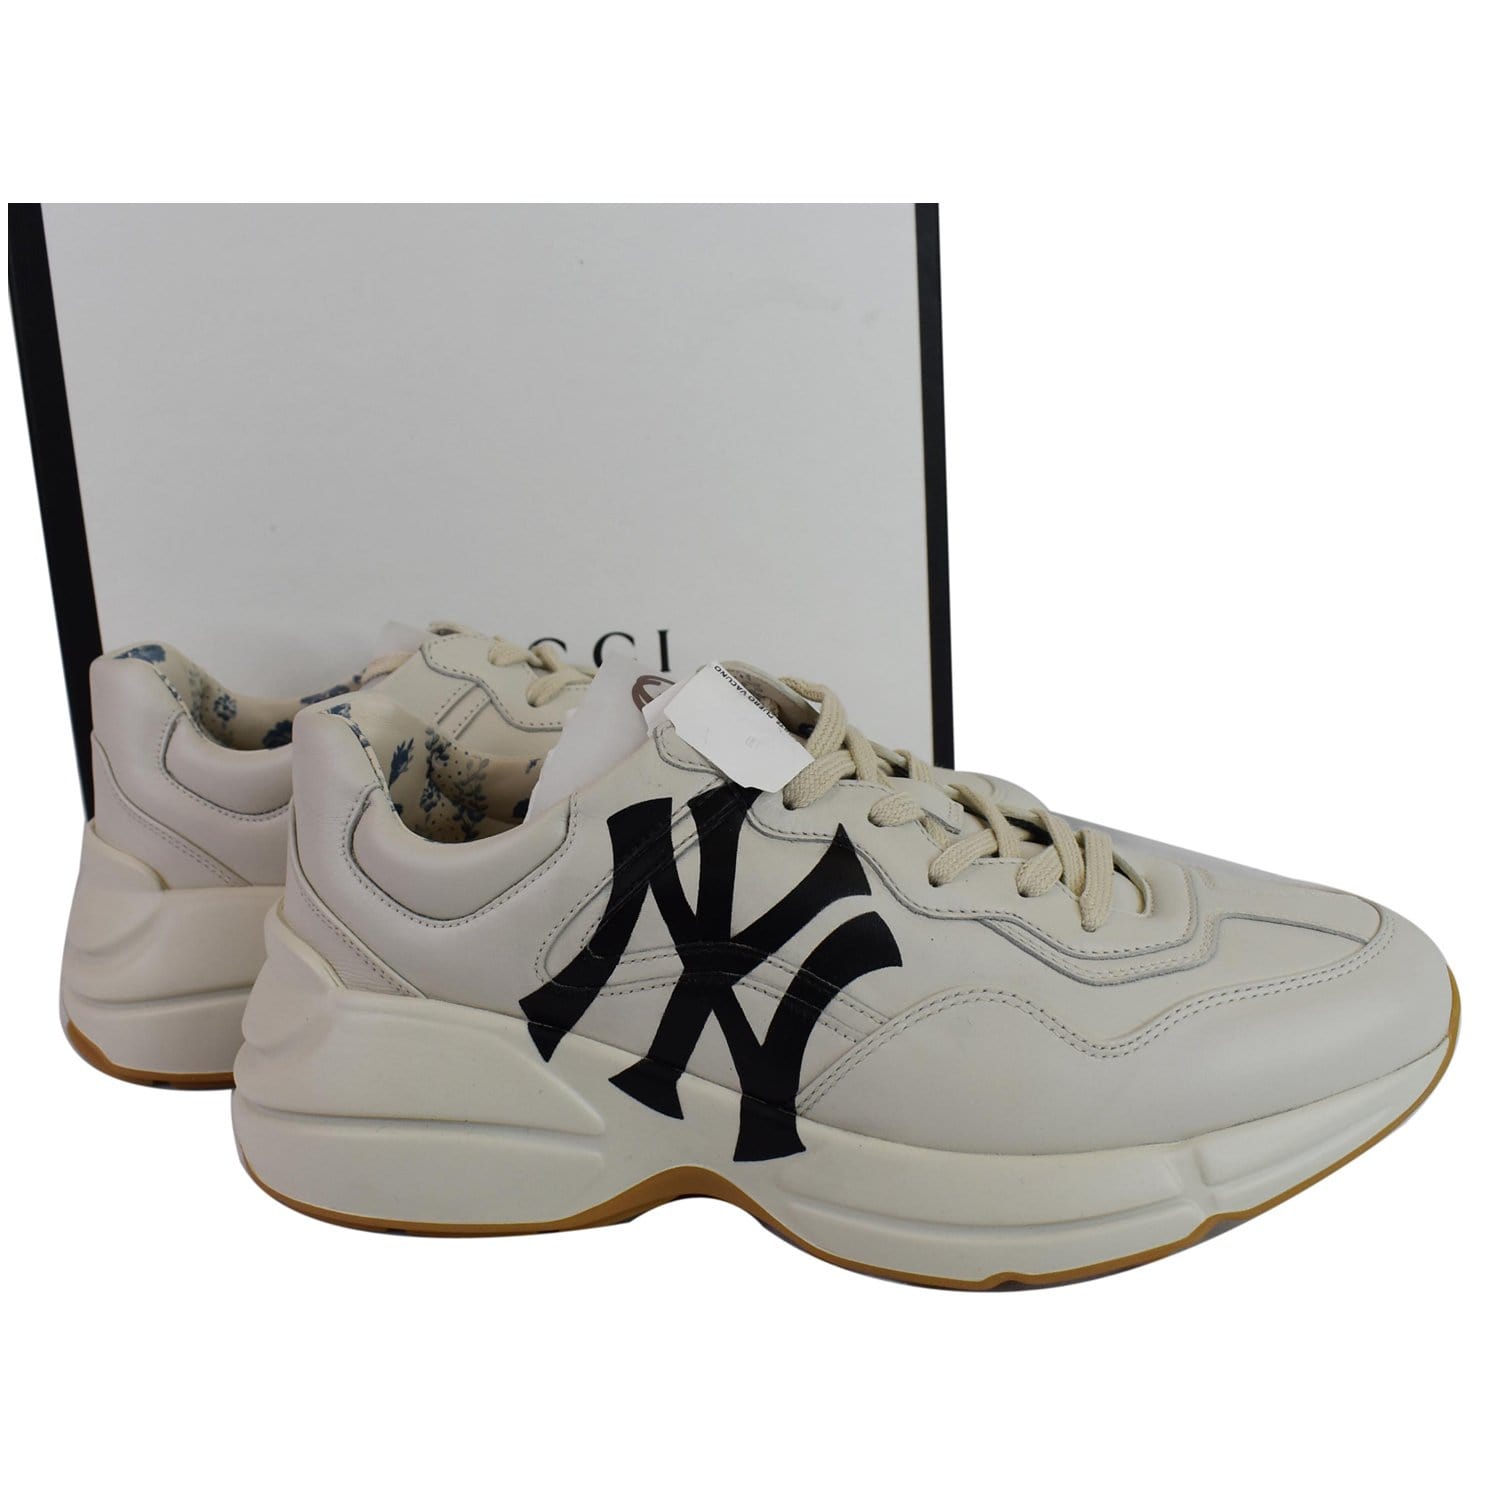 Gucci NY Yankees Leather Sneakers White 548638 US 7